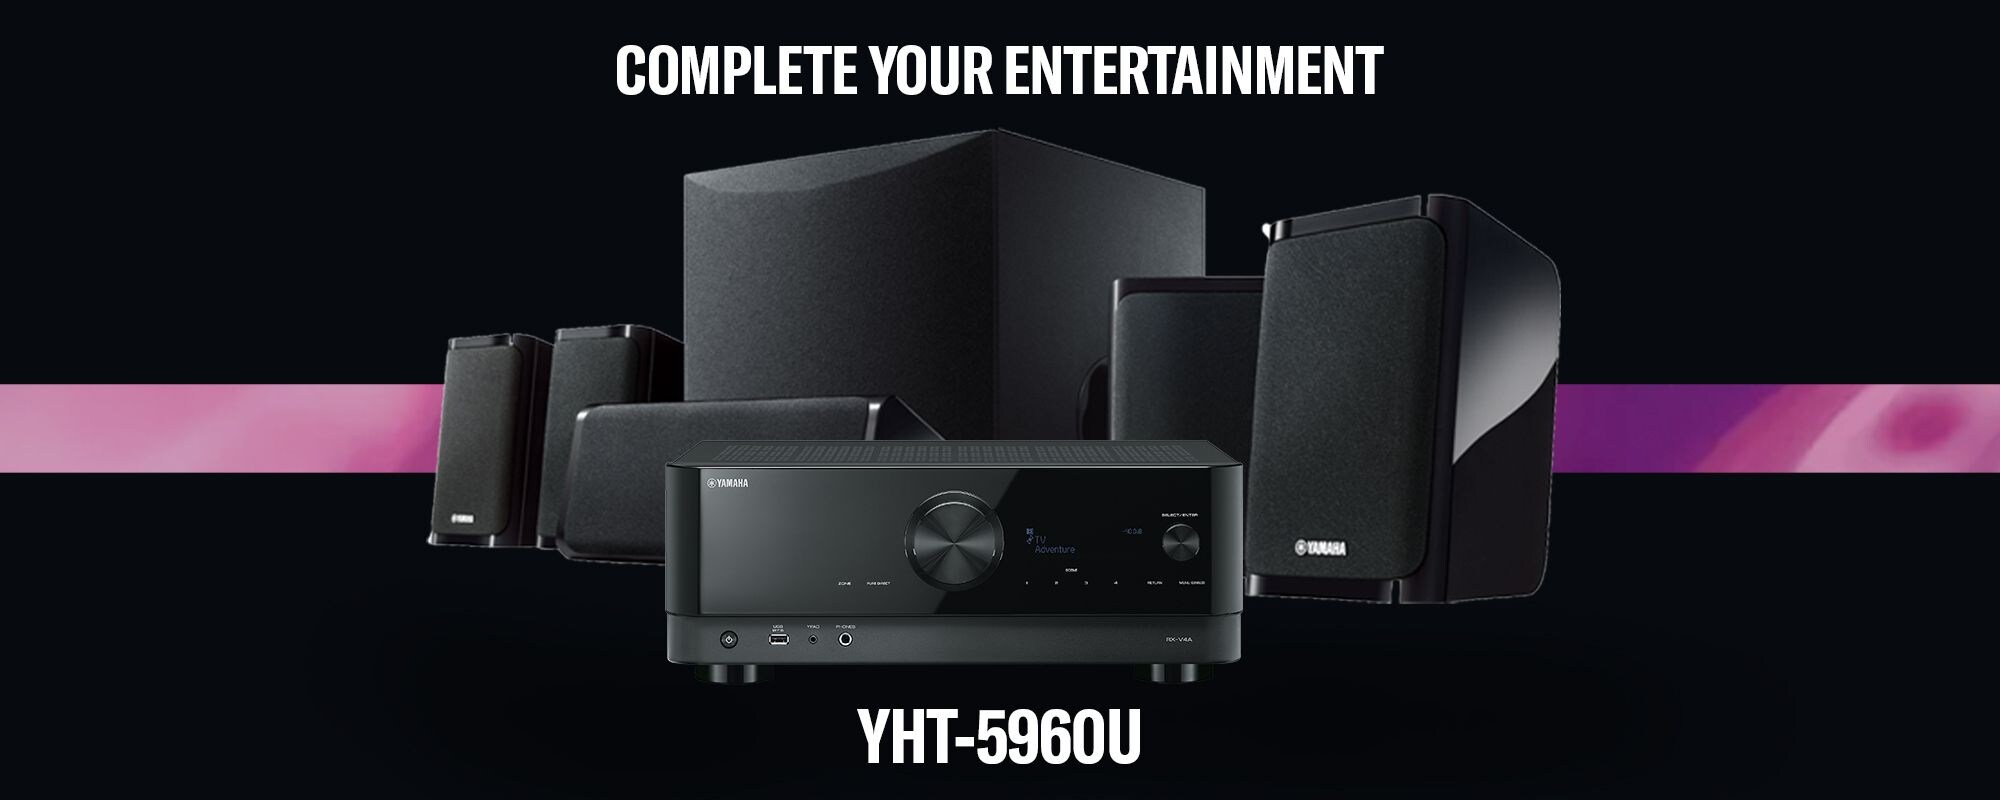 YHT-5960U 5.1-Channel 8K Home Theater System - Yamaha USA